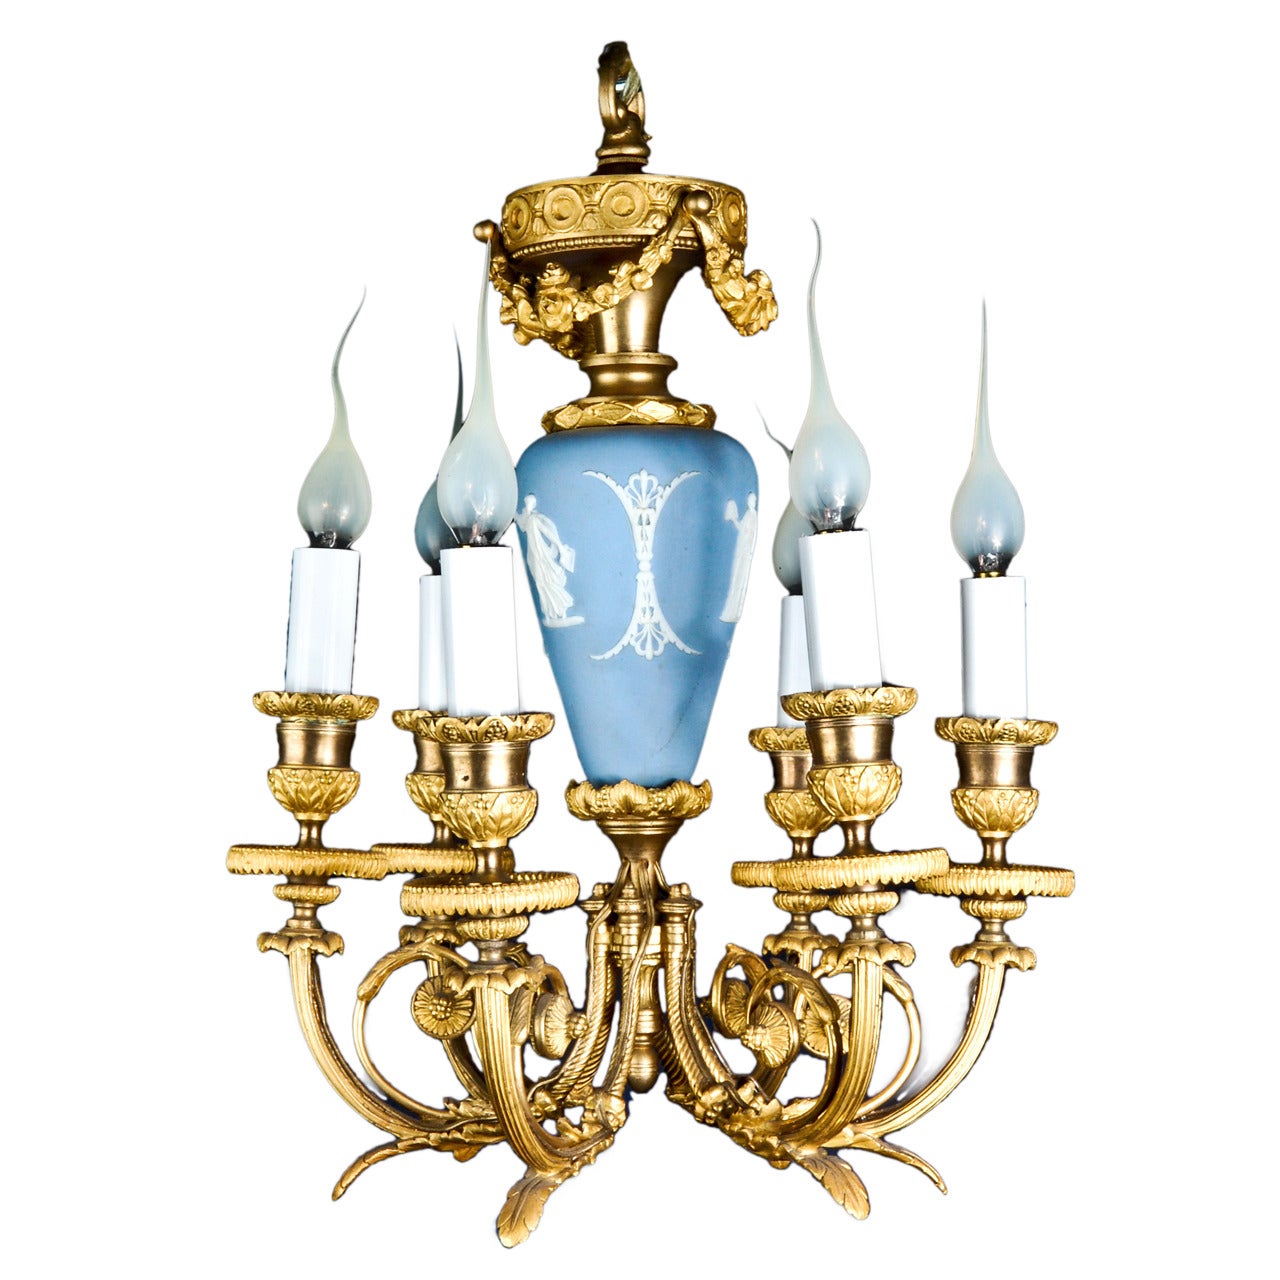 Fine Antique French Louis XVI Style Gilt Bronze and Wedgewood Chandelier For Sale